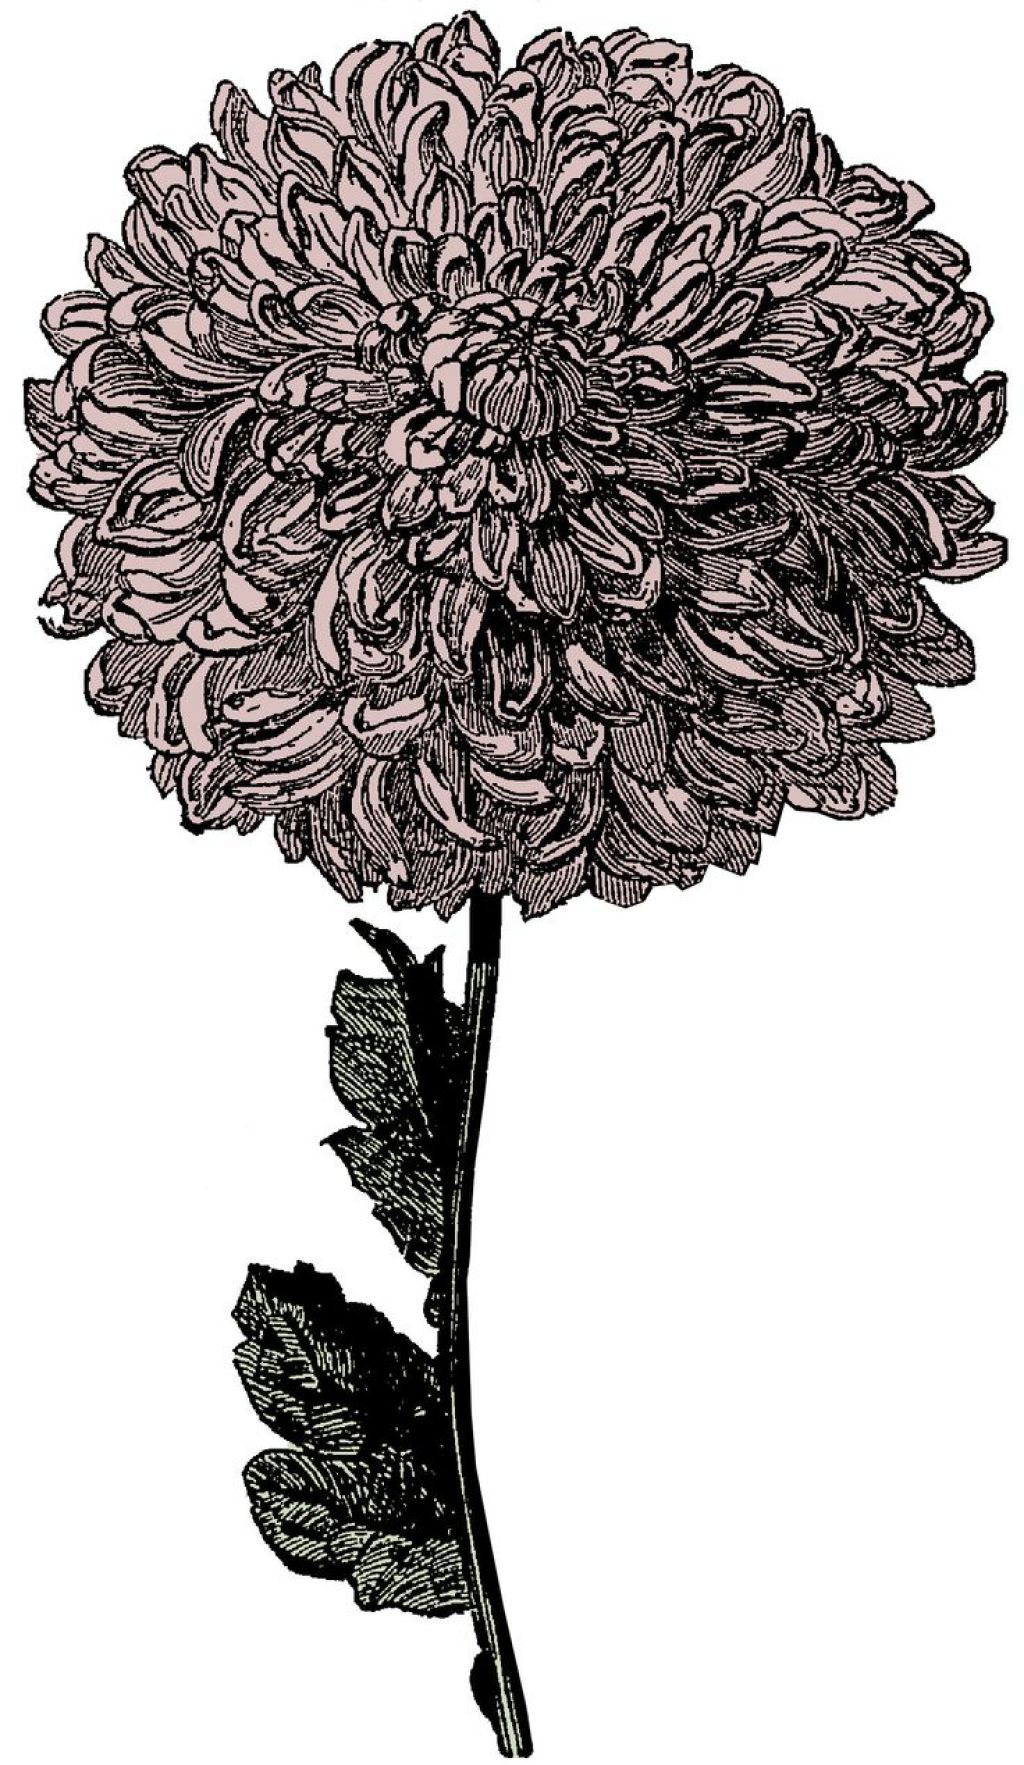 Clipart On Pinterest Chrysanthemum Flower Line Drawings And Cow ...